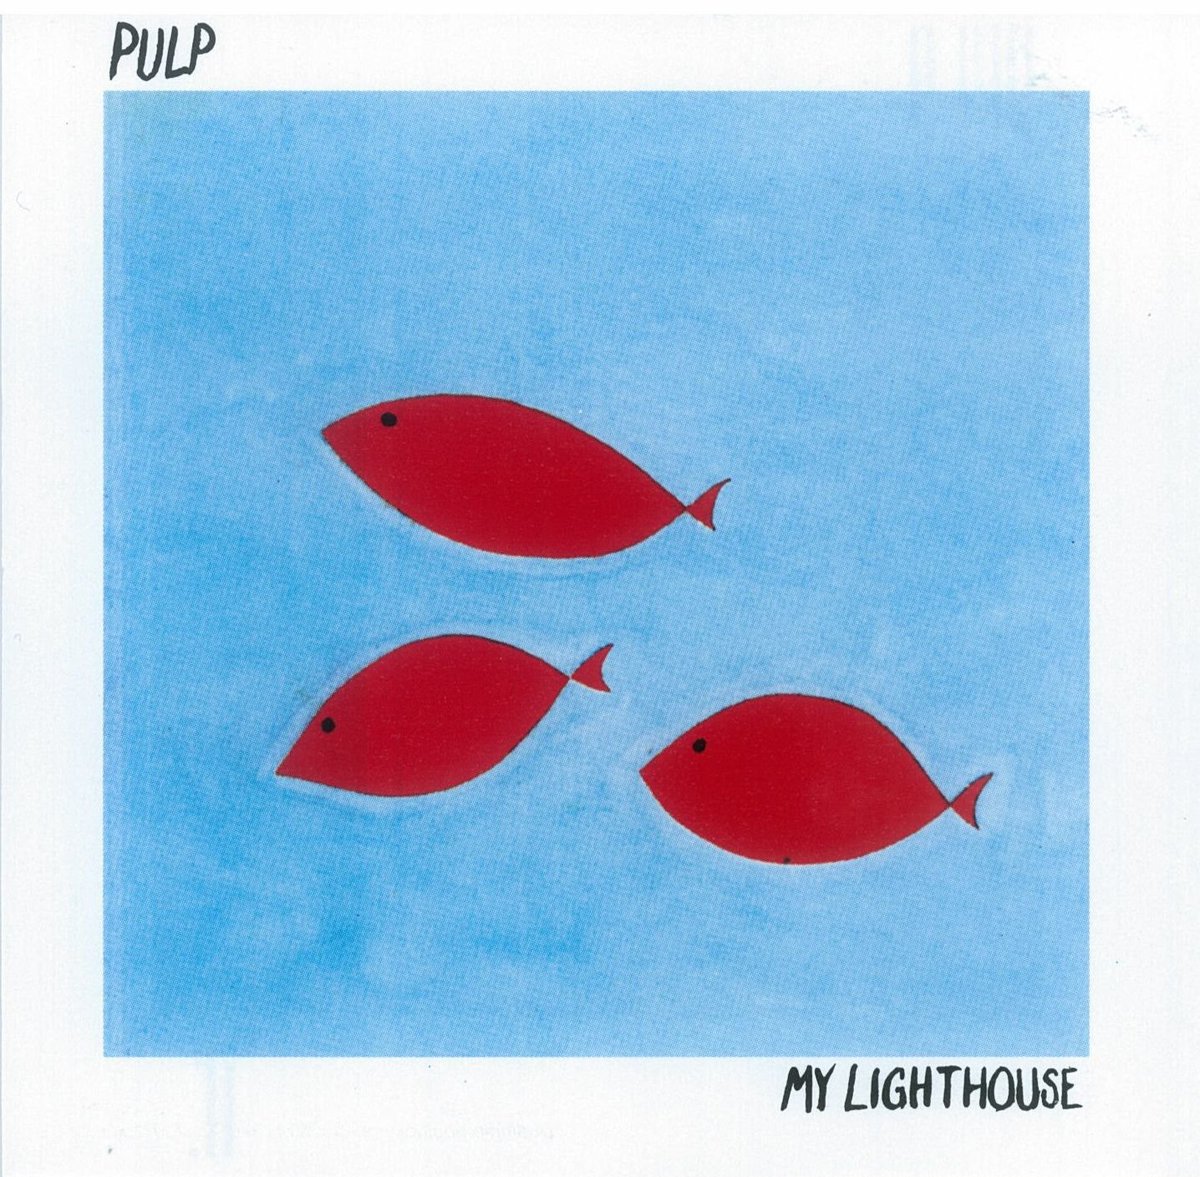 Happy 41st birthday to My Lighthouse ❤️🎉#pulp2024